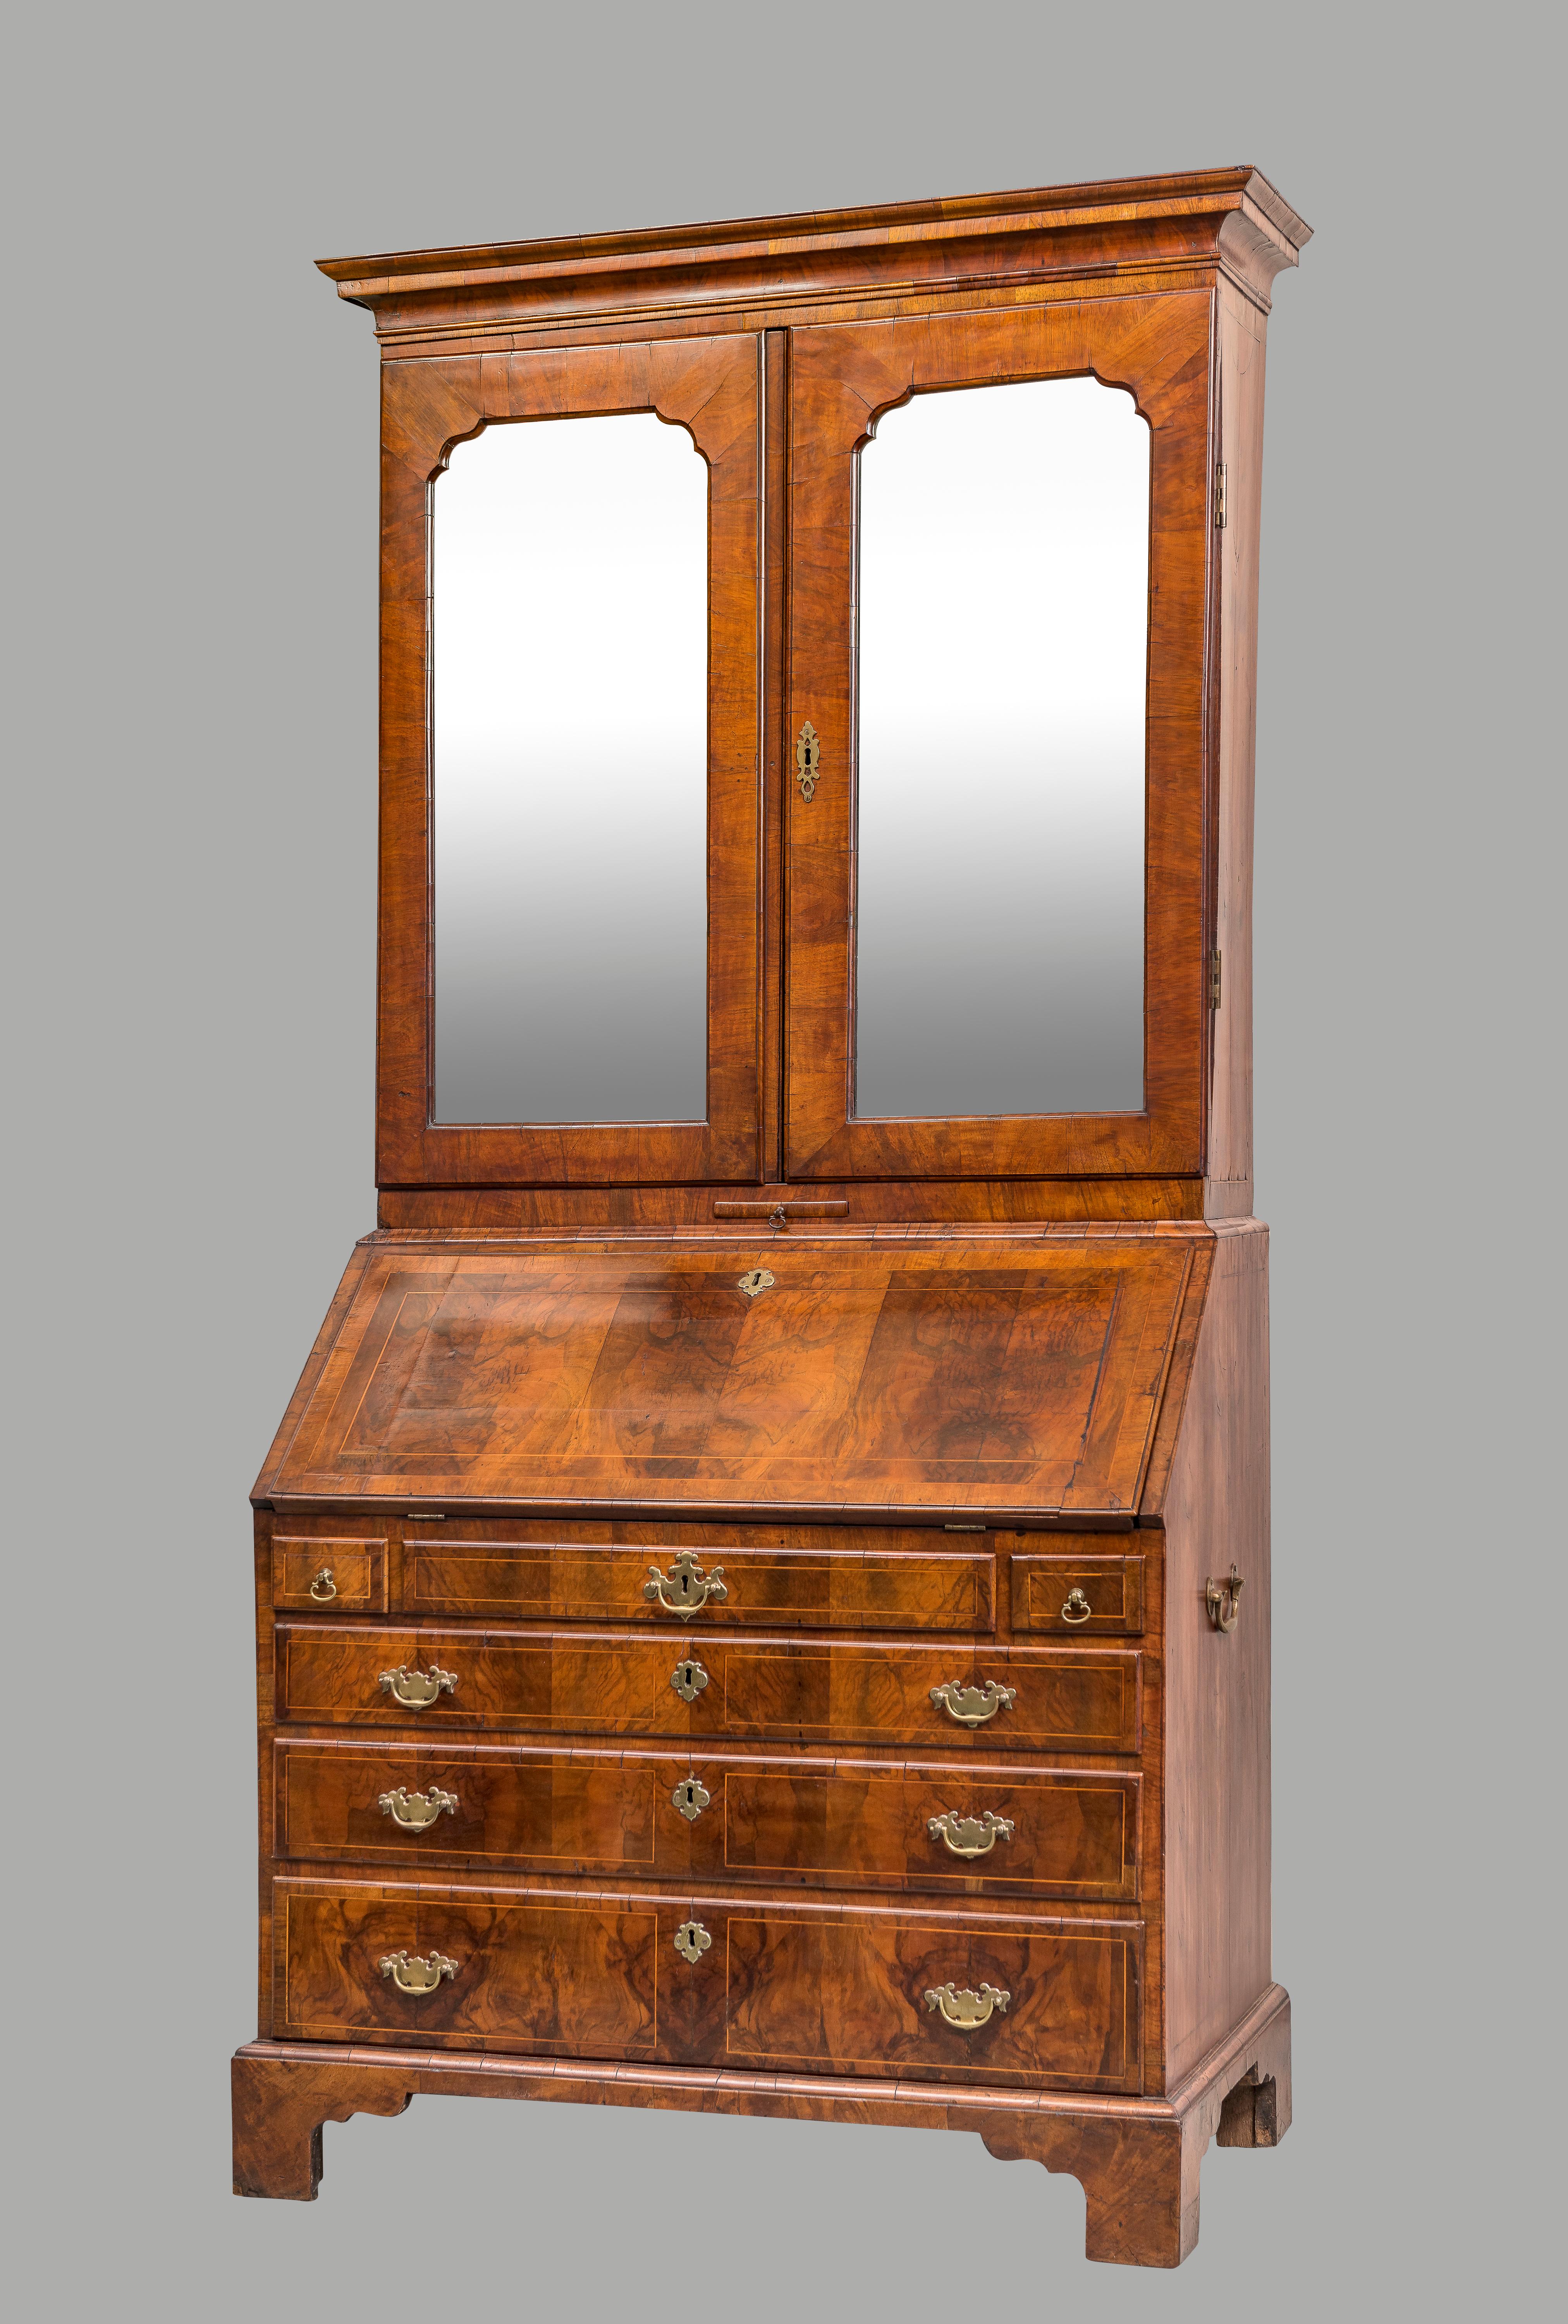 An English George II inlaid walnut secretary cabinet with mirrored doors, the upper stage with 2 interior adjustable shelves over 4 small drawers above a single candle slide, the lower with a fall front bureau containing a well-fitted interior with